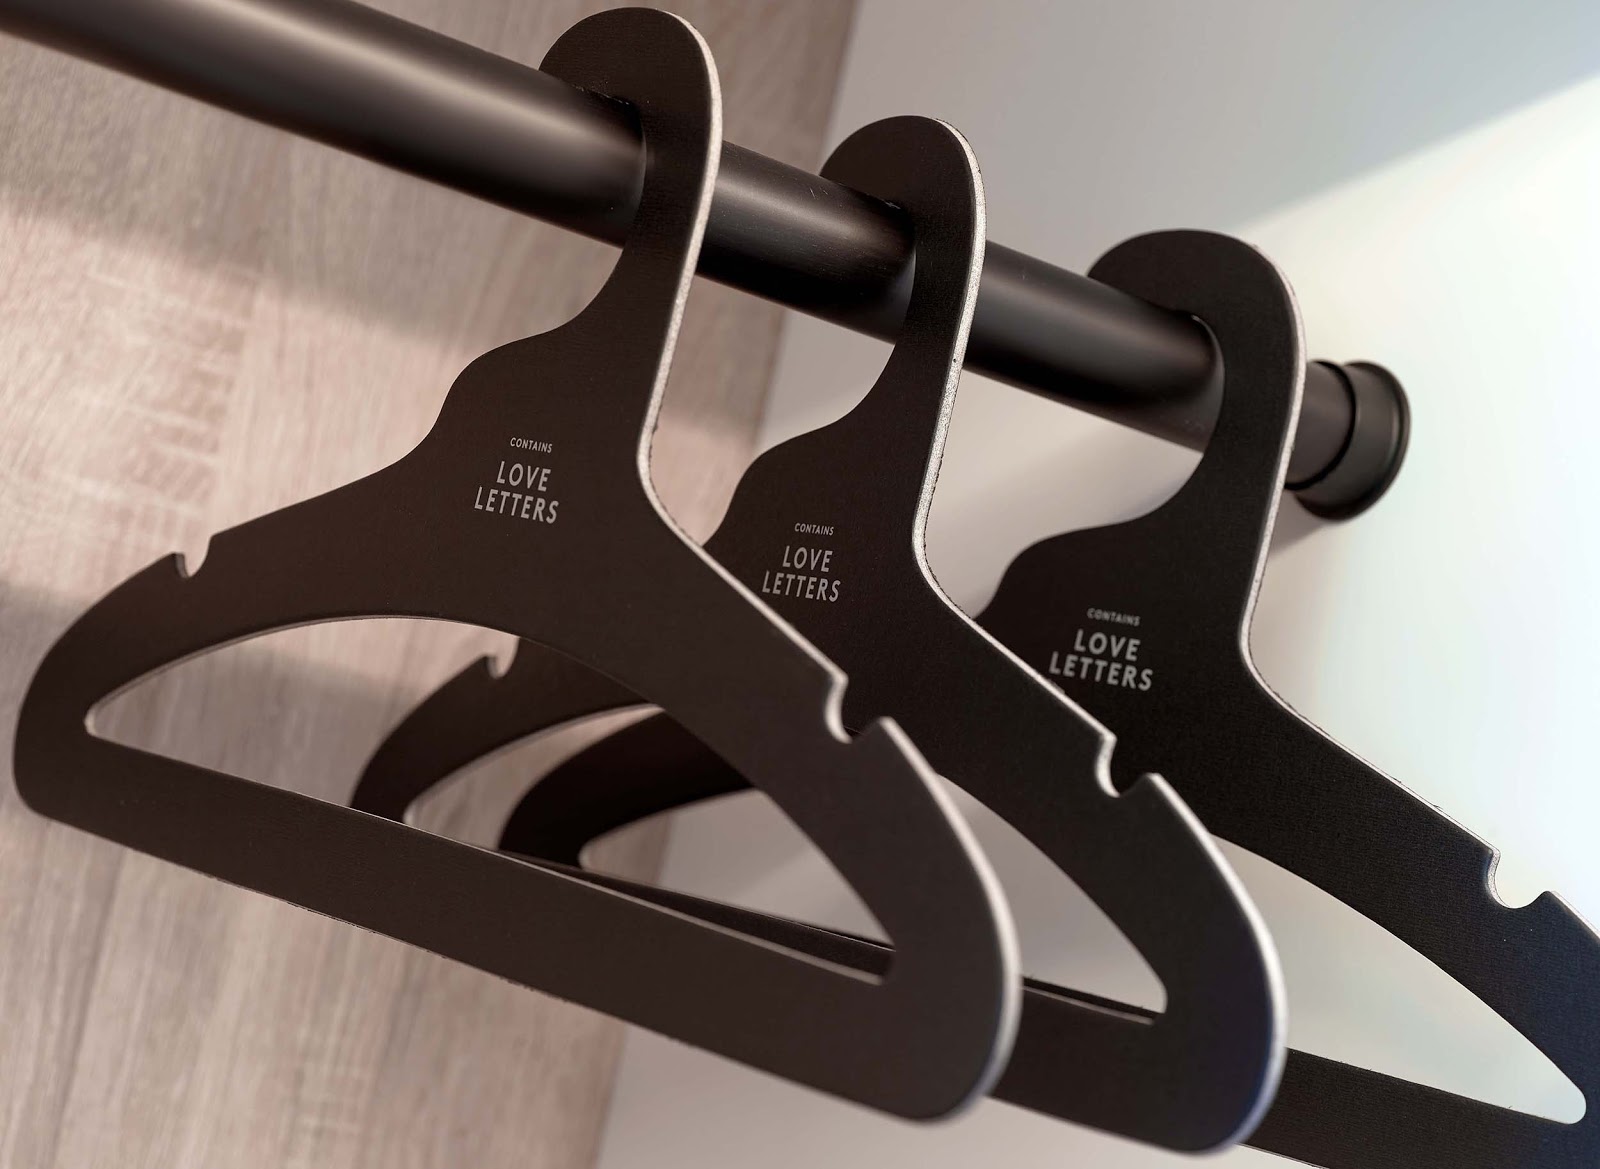 Three clothes hangers made from recycled paper products